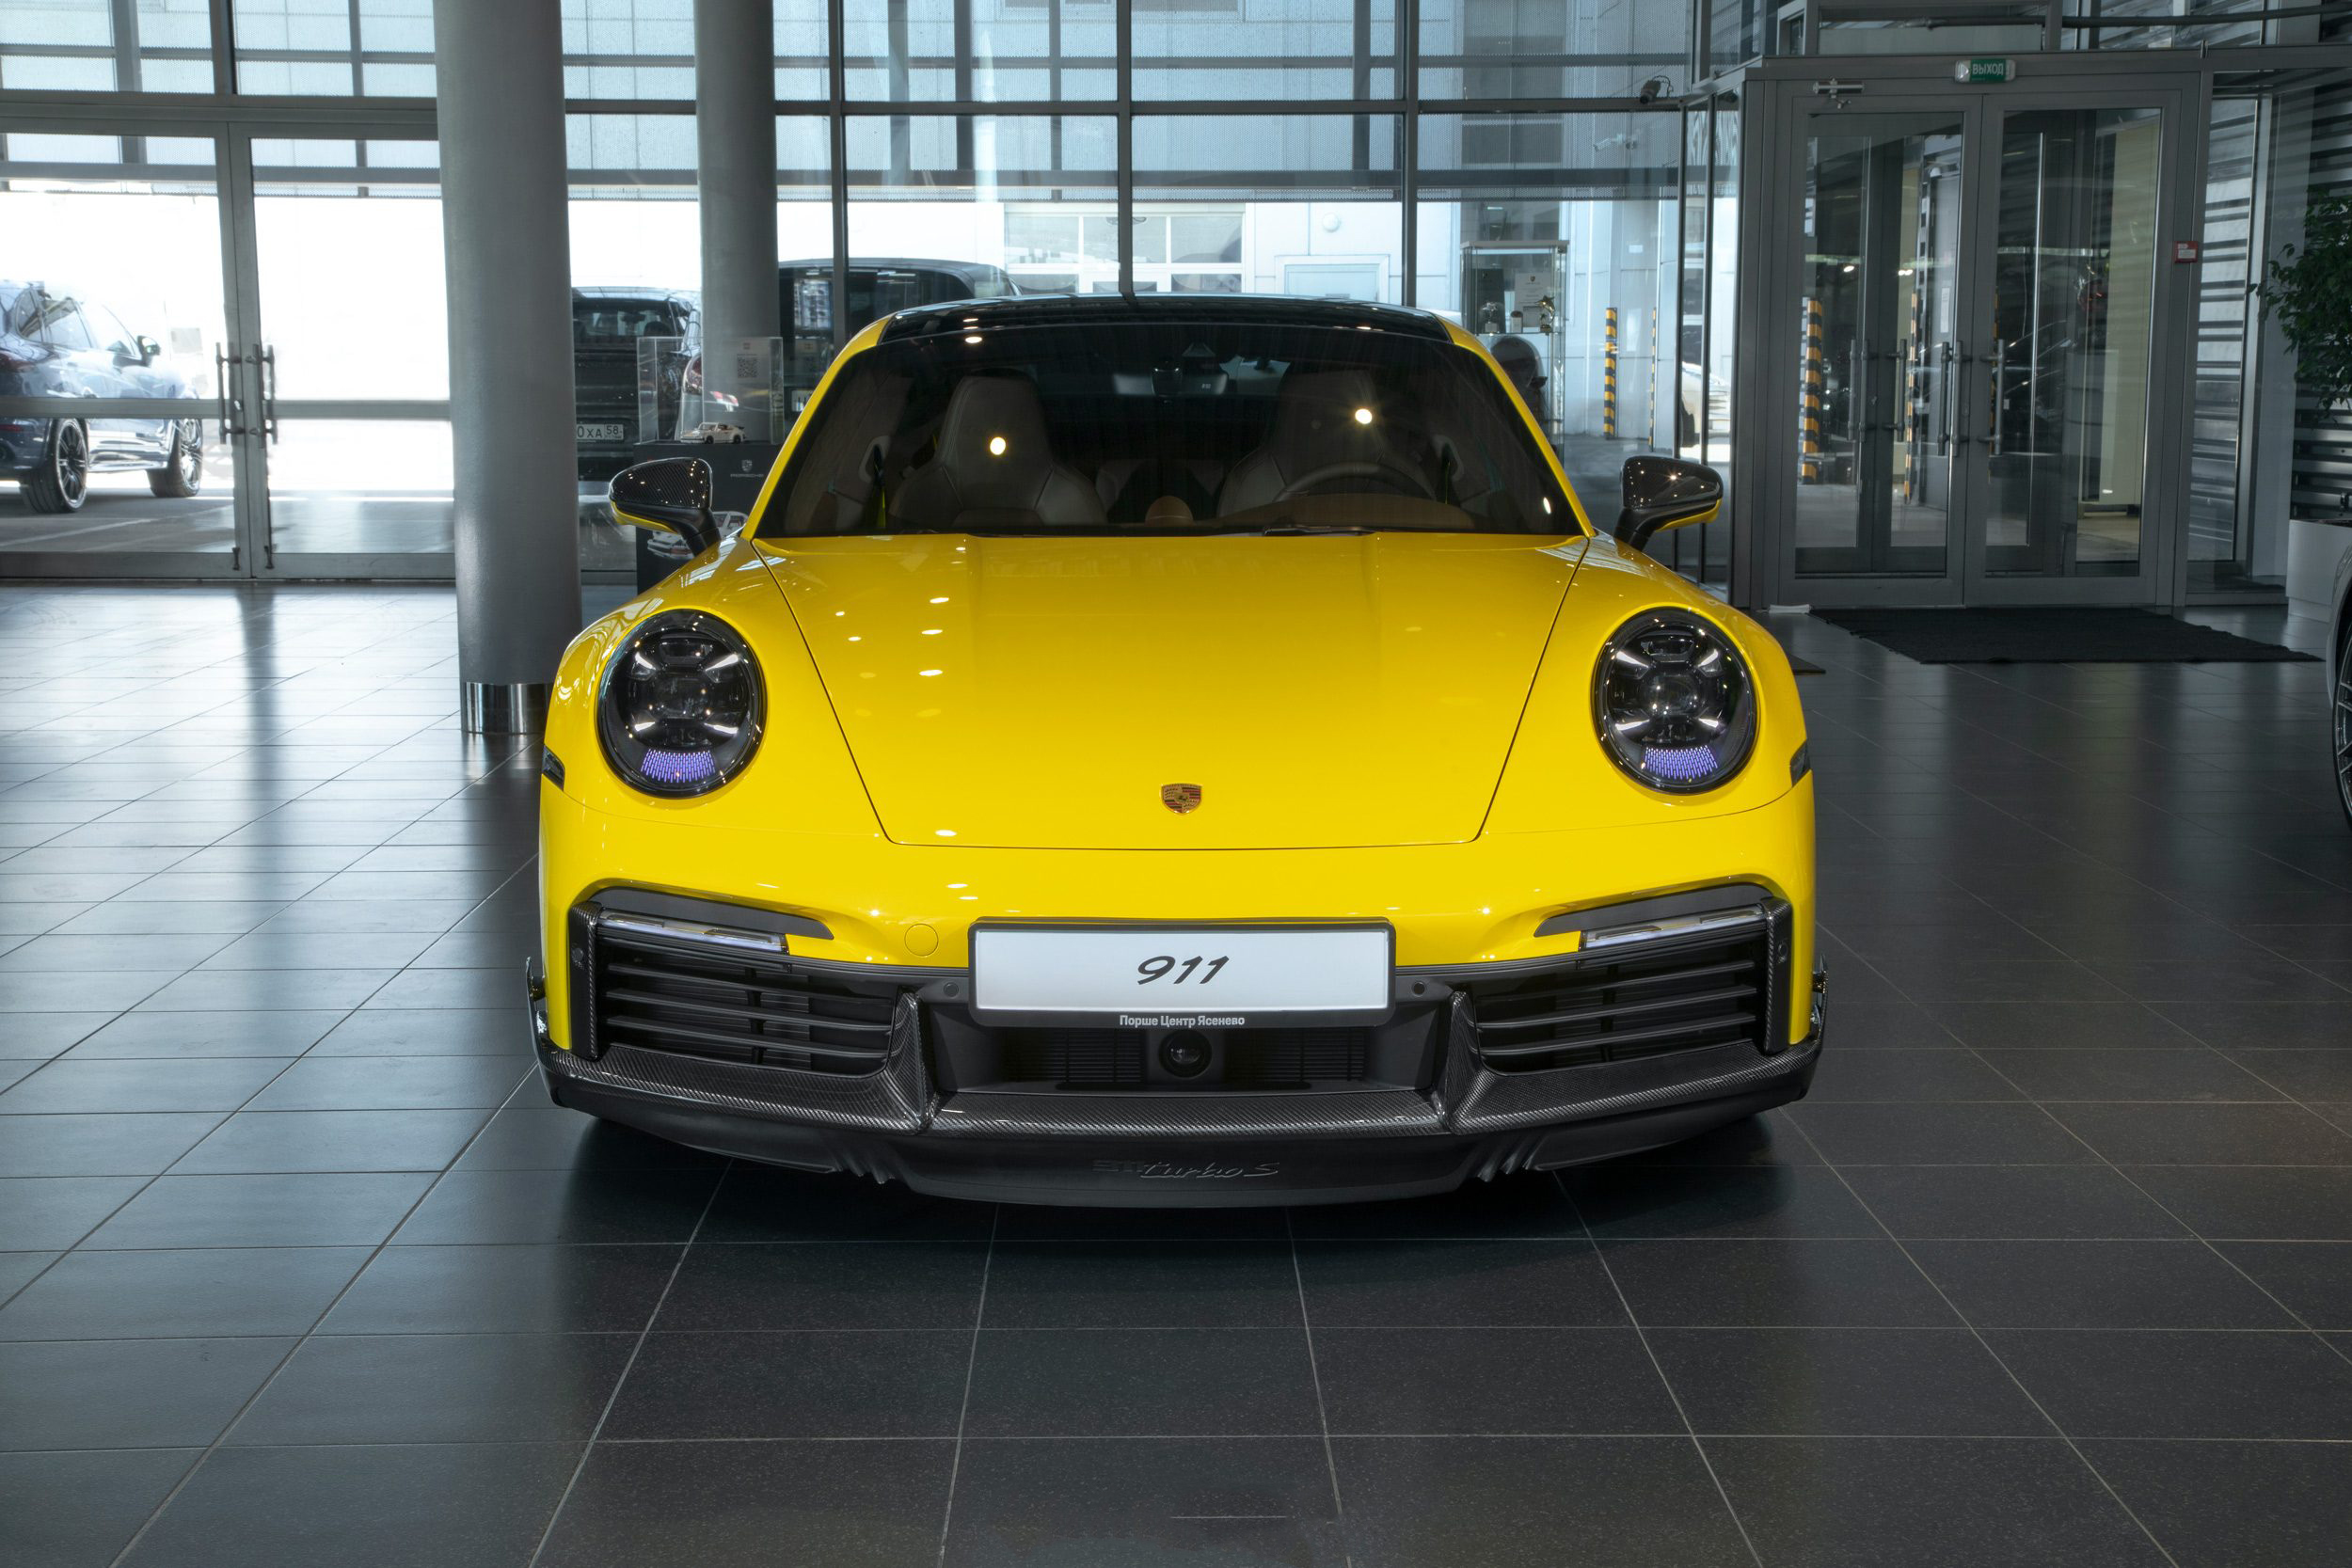 Check our price and buy Carbon Fiber Body kit set for Porsche 911 Turbo S